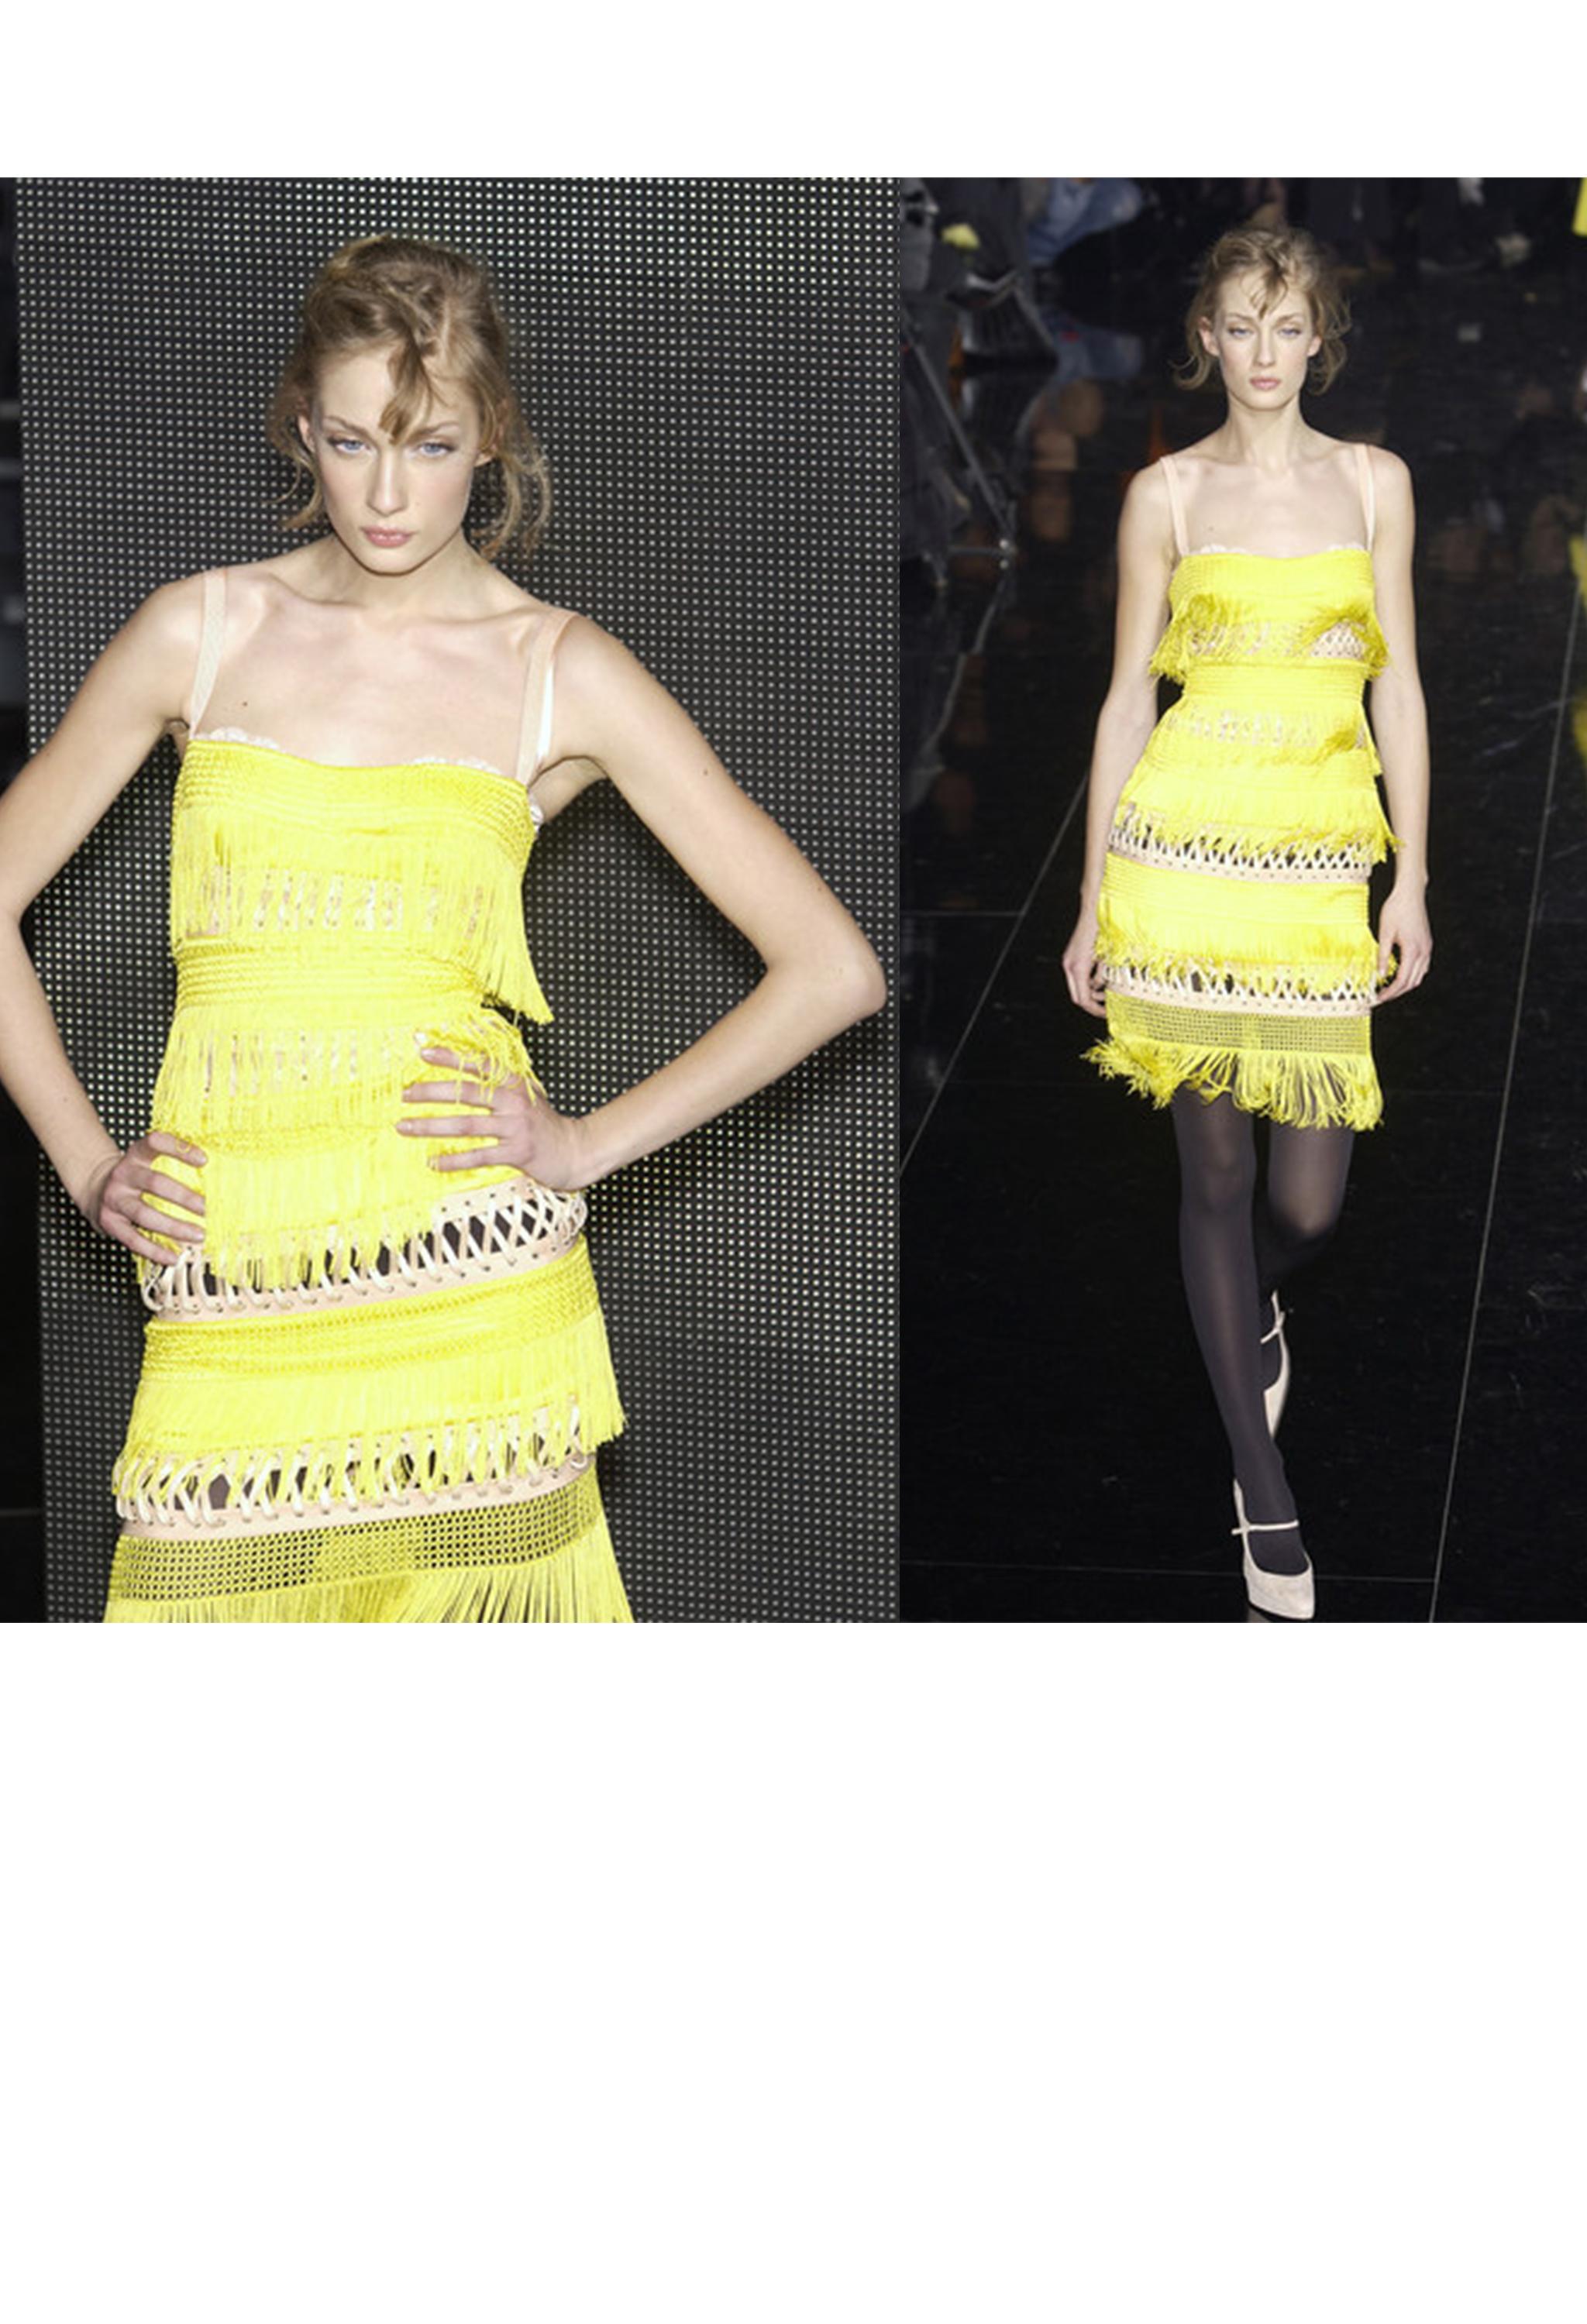 Resurrection Vintage is excited to offer a vintage Dolce & Gabbana yellow fringe party dress featuring nude casing with decorative corset seaming on the under layer, internal bra, nude straps, tiered fringe panels, knotted crochet panels, a center